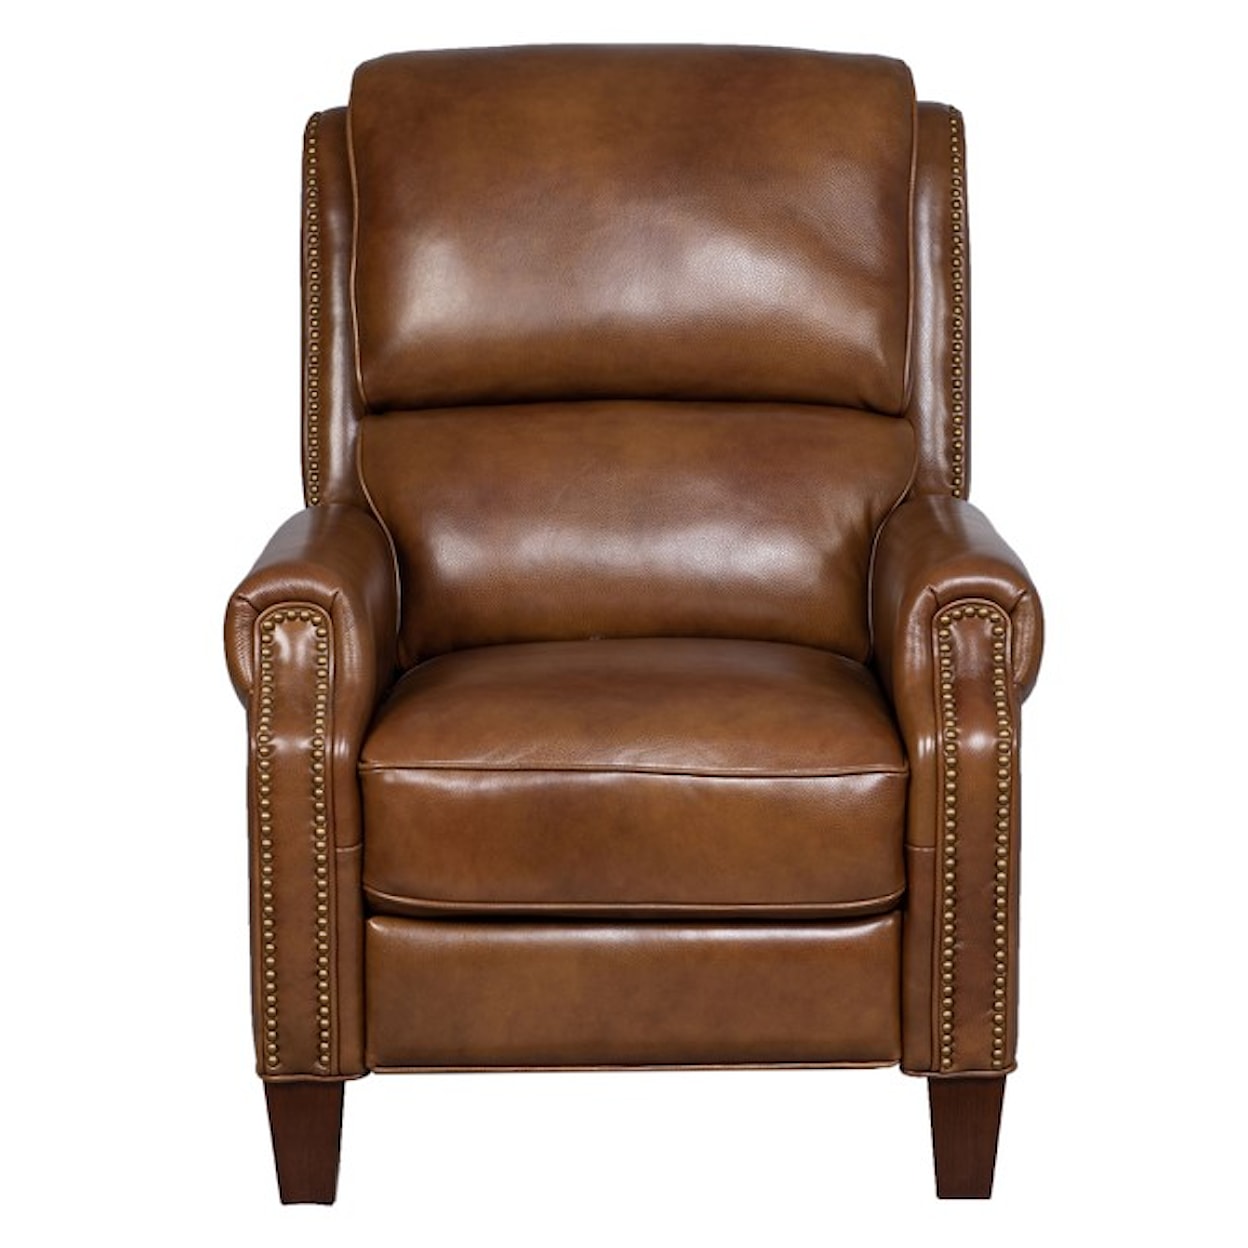 Synergy Home Furnishings 1914 Pushback Recliner